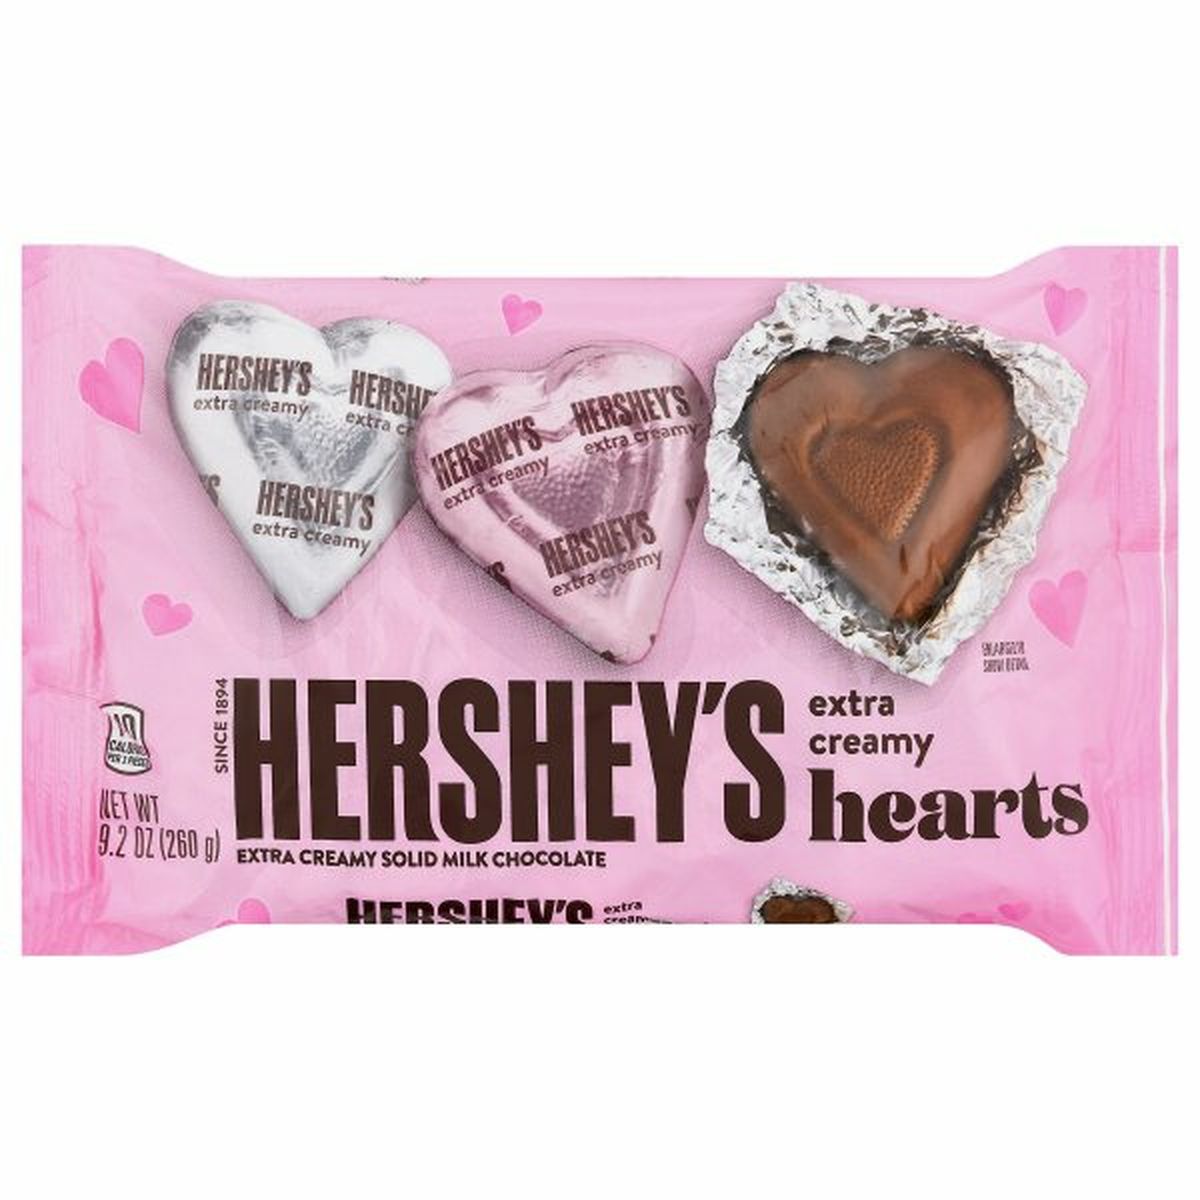 Calories in Hershey's Hearts Solid Milk Chocolate, Extra Creamy